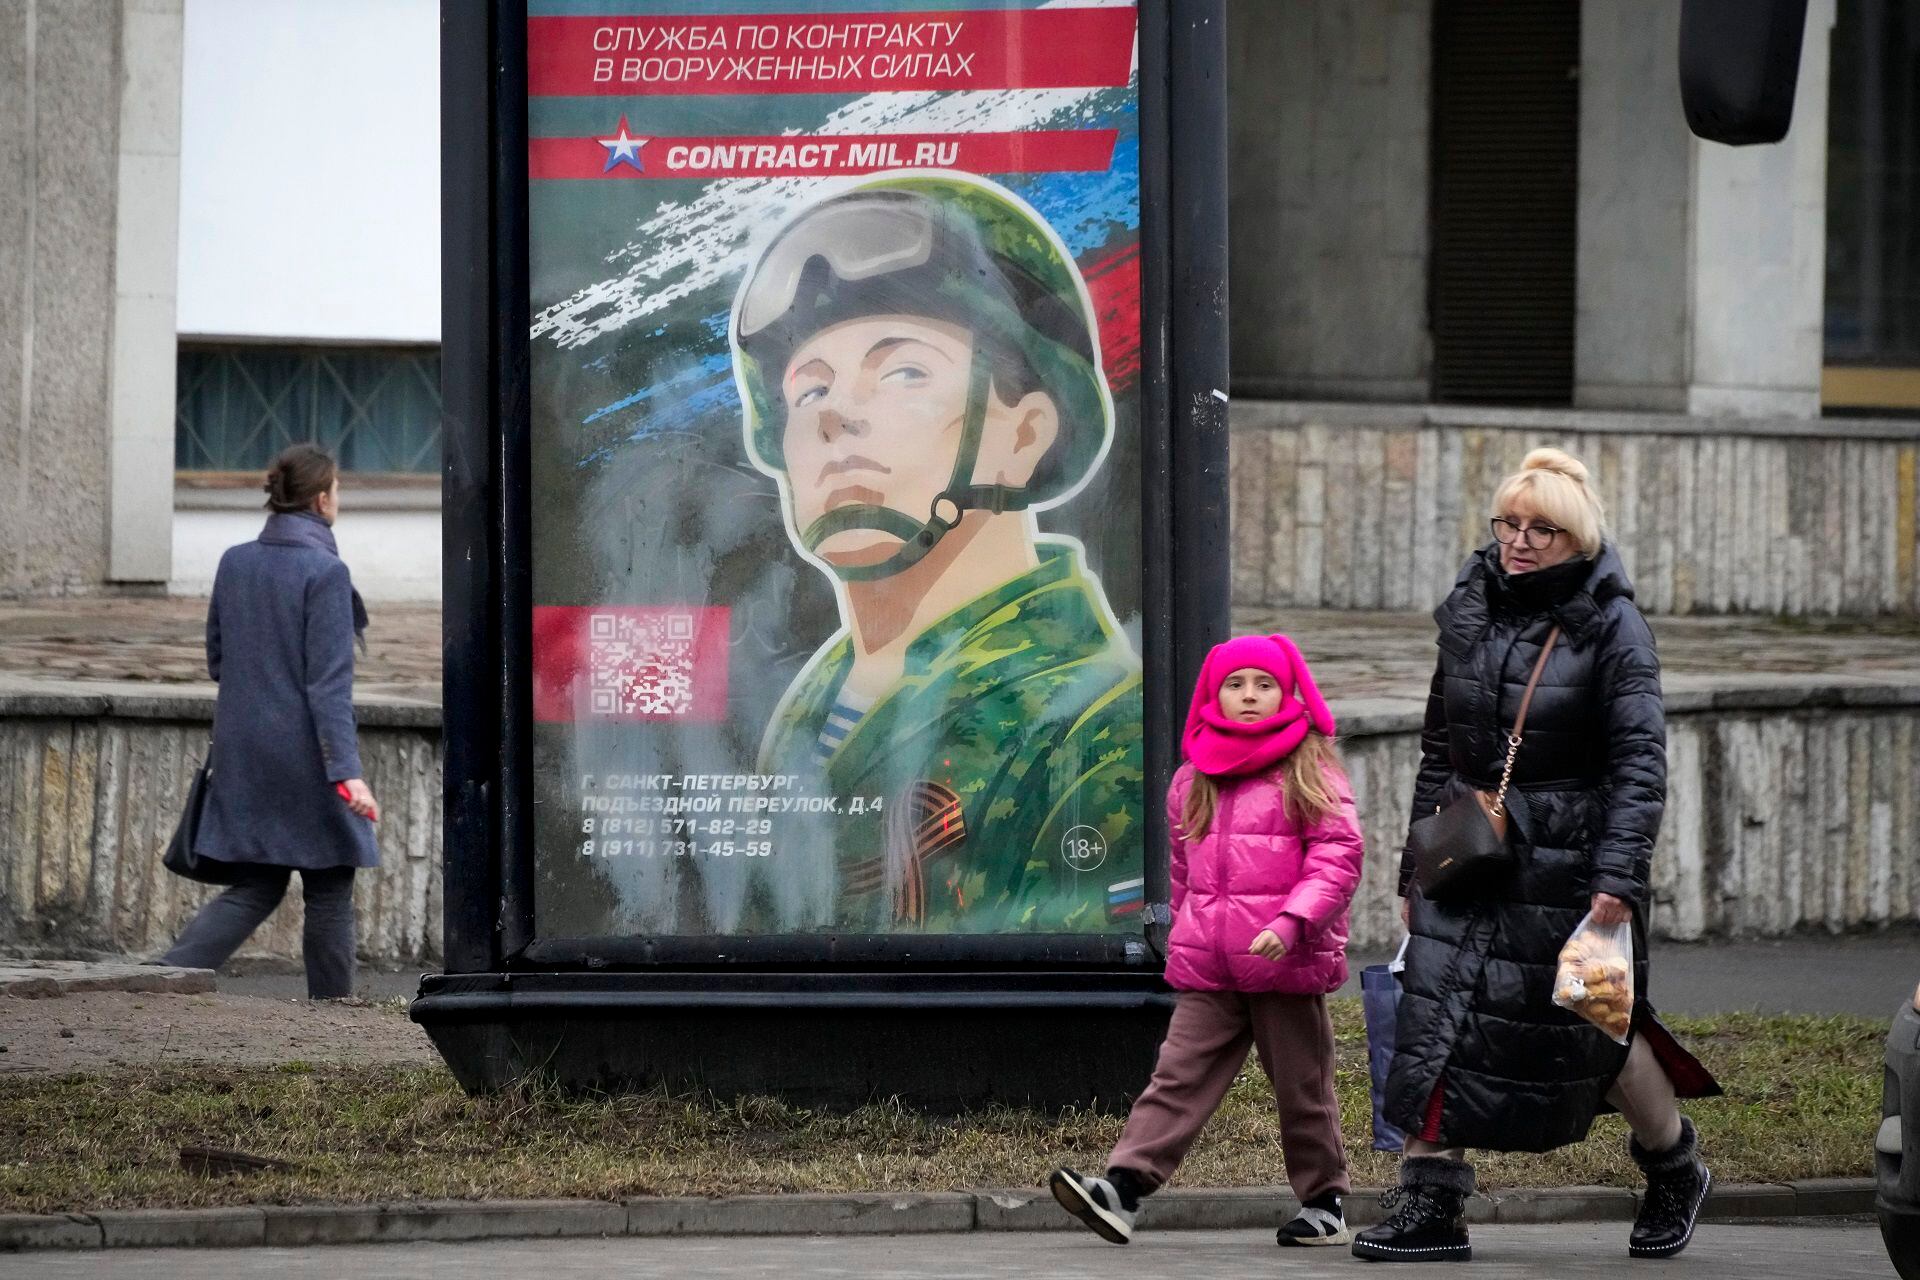 People walk past an army recruiting billboard with the words "Military service under contract in the armed forces" in St. Petersburg, Russia, Friday, March 24, 2023. A campaign to replenish Russian troops in Ukraine with more soldiers appears to be underway again, with makeshift recruitment centers popping up in cities and towns, and state institutions posting ads promising cash bonuses and benefits to entice men to sign contracts enabling them to be sent into the battlefield. (AP Photo)